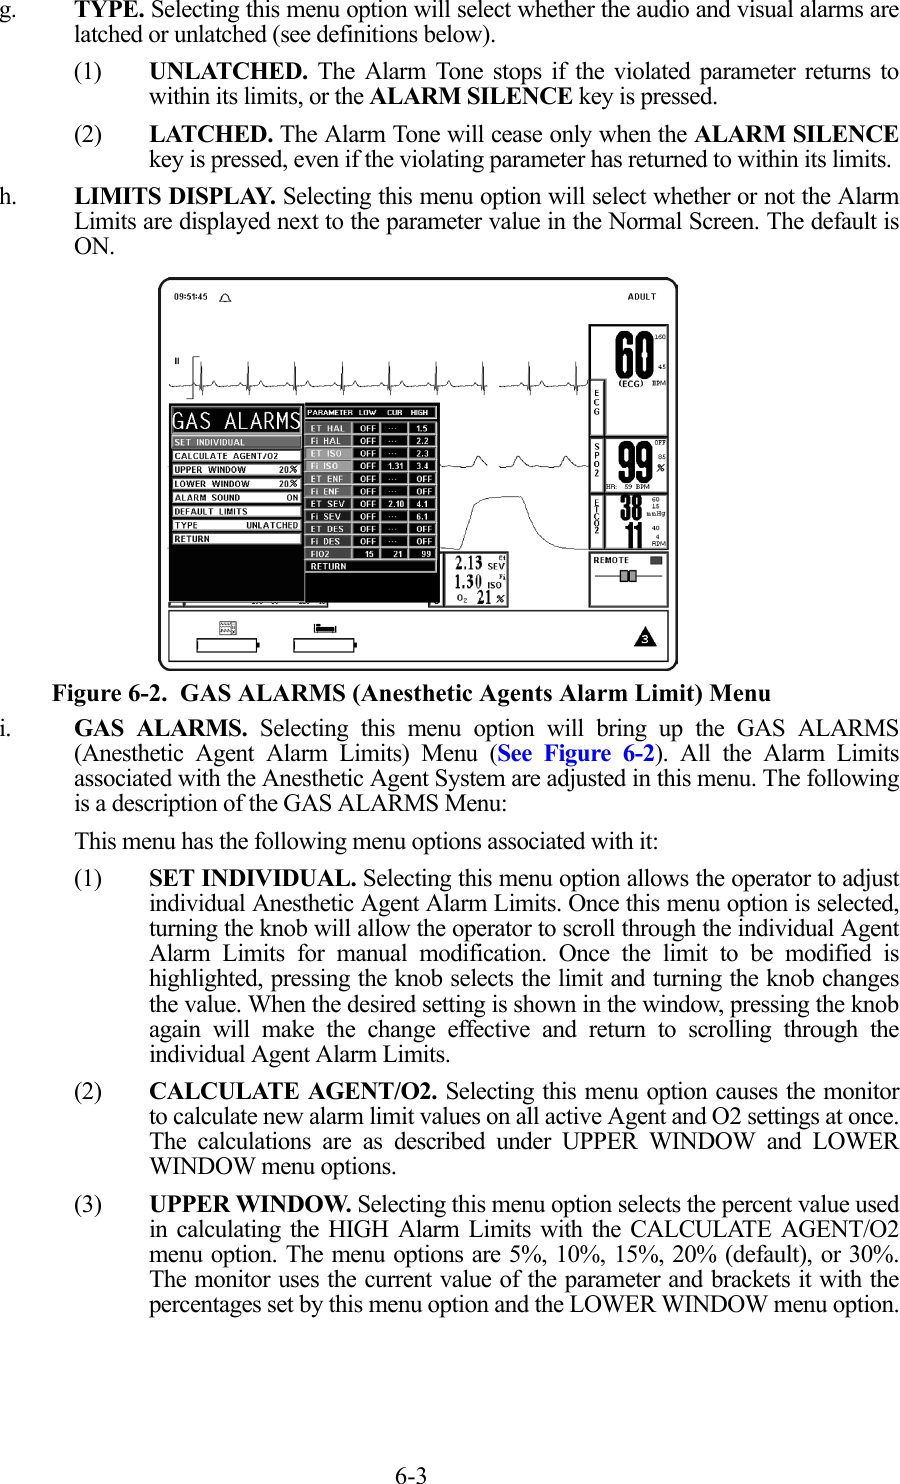 6-3g. TYPE. Selecting this menu option will select whether the audio and visual alarms arelatched or unlatched (see definitions below).(1) UNLATCHED. The Alarm Tone stops if the violated parameter returns towithin its limits, or the ALARM SILENCE key is pressed.(2) LATCHED. The Alarm Tone will cease only when the ALARM SILENCEkey is pressed, even if the violating parameter has returned to within its limits.h. LIMITS DISPLAY. Selecting this menu option will select whether or not the AlarmLimits are displayed next to the parameter value in the Normal Screen. The default isON.  Figure 6-2.  GAS ALARMS (Anesthetic Agents Alarm Limit) Menui. GAS ALARMS. Selecting this menu option will bring up the GAS ALARMS(Anesthetic Agent Alarm Limits) Menu (See Figure 6-2). All the Alarm Limitsassociated with the Anesthetic Agent System are adjusted in this menu. The followingis a description of the GAS ALARMS Menu:This menu has the following menu options associated with it:(1) SET INDIVIDUAL. Selecting this menu option allows the operator to adjustindividual Anesthetic Agent Alarm Limits. Once this menu option is selected,turning the knob will allow the operator to scroll through the individual AgentAlarm Limits for manual modification. Once the limit to be modified ishighlighted, pressing the knob selects the limit and turning the knob changesthe value. When the desired setting is shown in the window, pressing the knobagain will make the change effective and return to scrolling through theindividual Agent Alarm Limits.(2) CALCULATE AGENT/O2. Selecting this menu option causes the monitorto calculate new alarm limit values on all active Agent and O2 settings at once.The calculations are as described under UPPER WINDOW and LOWERWINDOW menu options.(3) UPPER WINDOW. Selecting this menu option selects the percent value usedin calculating the HIGH Alarm Limits with the CALCULATE AGENT/O2menu option. The menu options are 5%, 10%, 15%, 20% (default), or 30%.The monitor uses the current value of the parameter and brackets it with thepercentages set by this menu option and the LOWER WINDOW menu option.